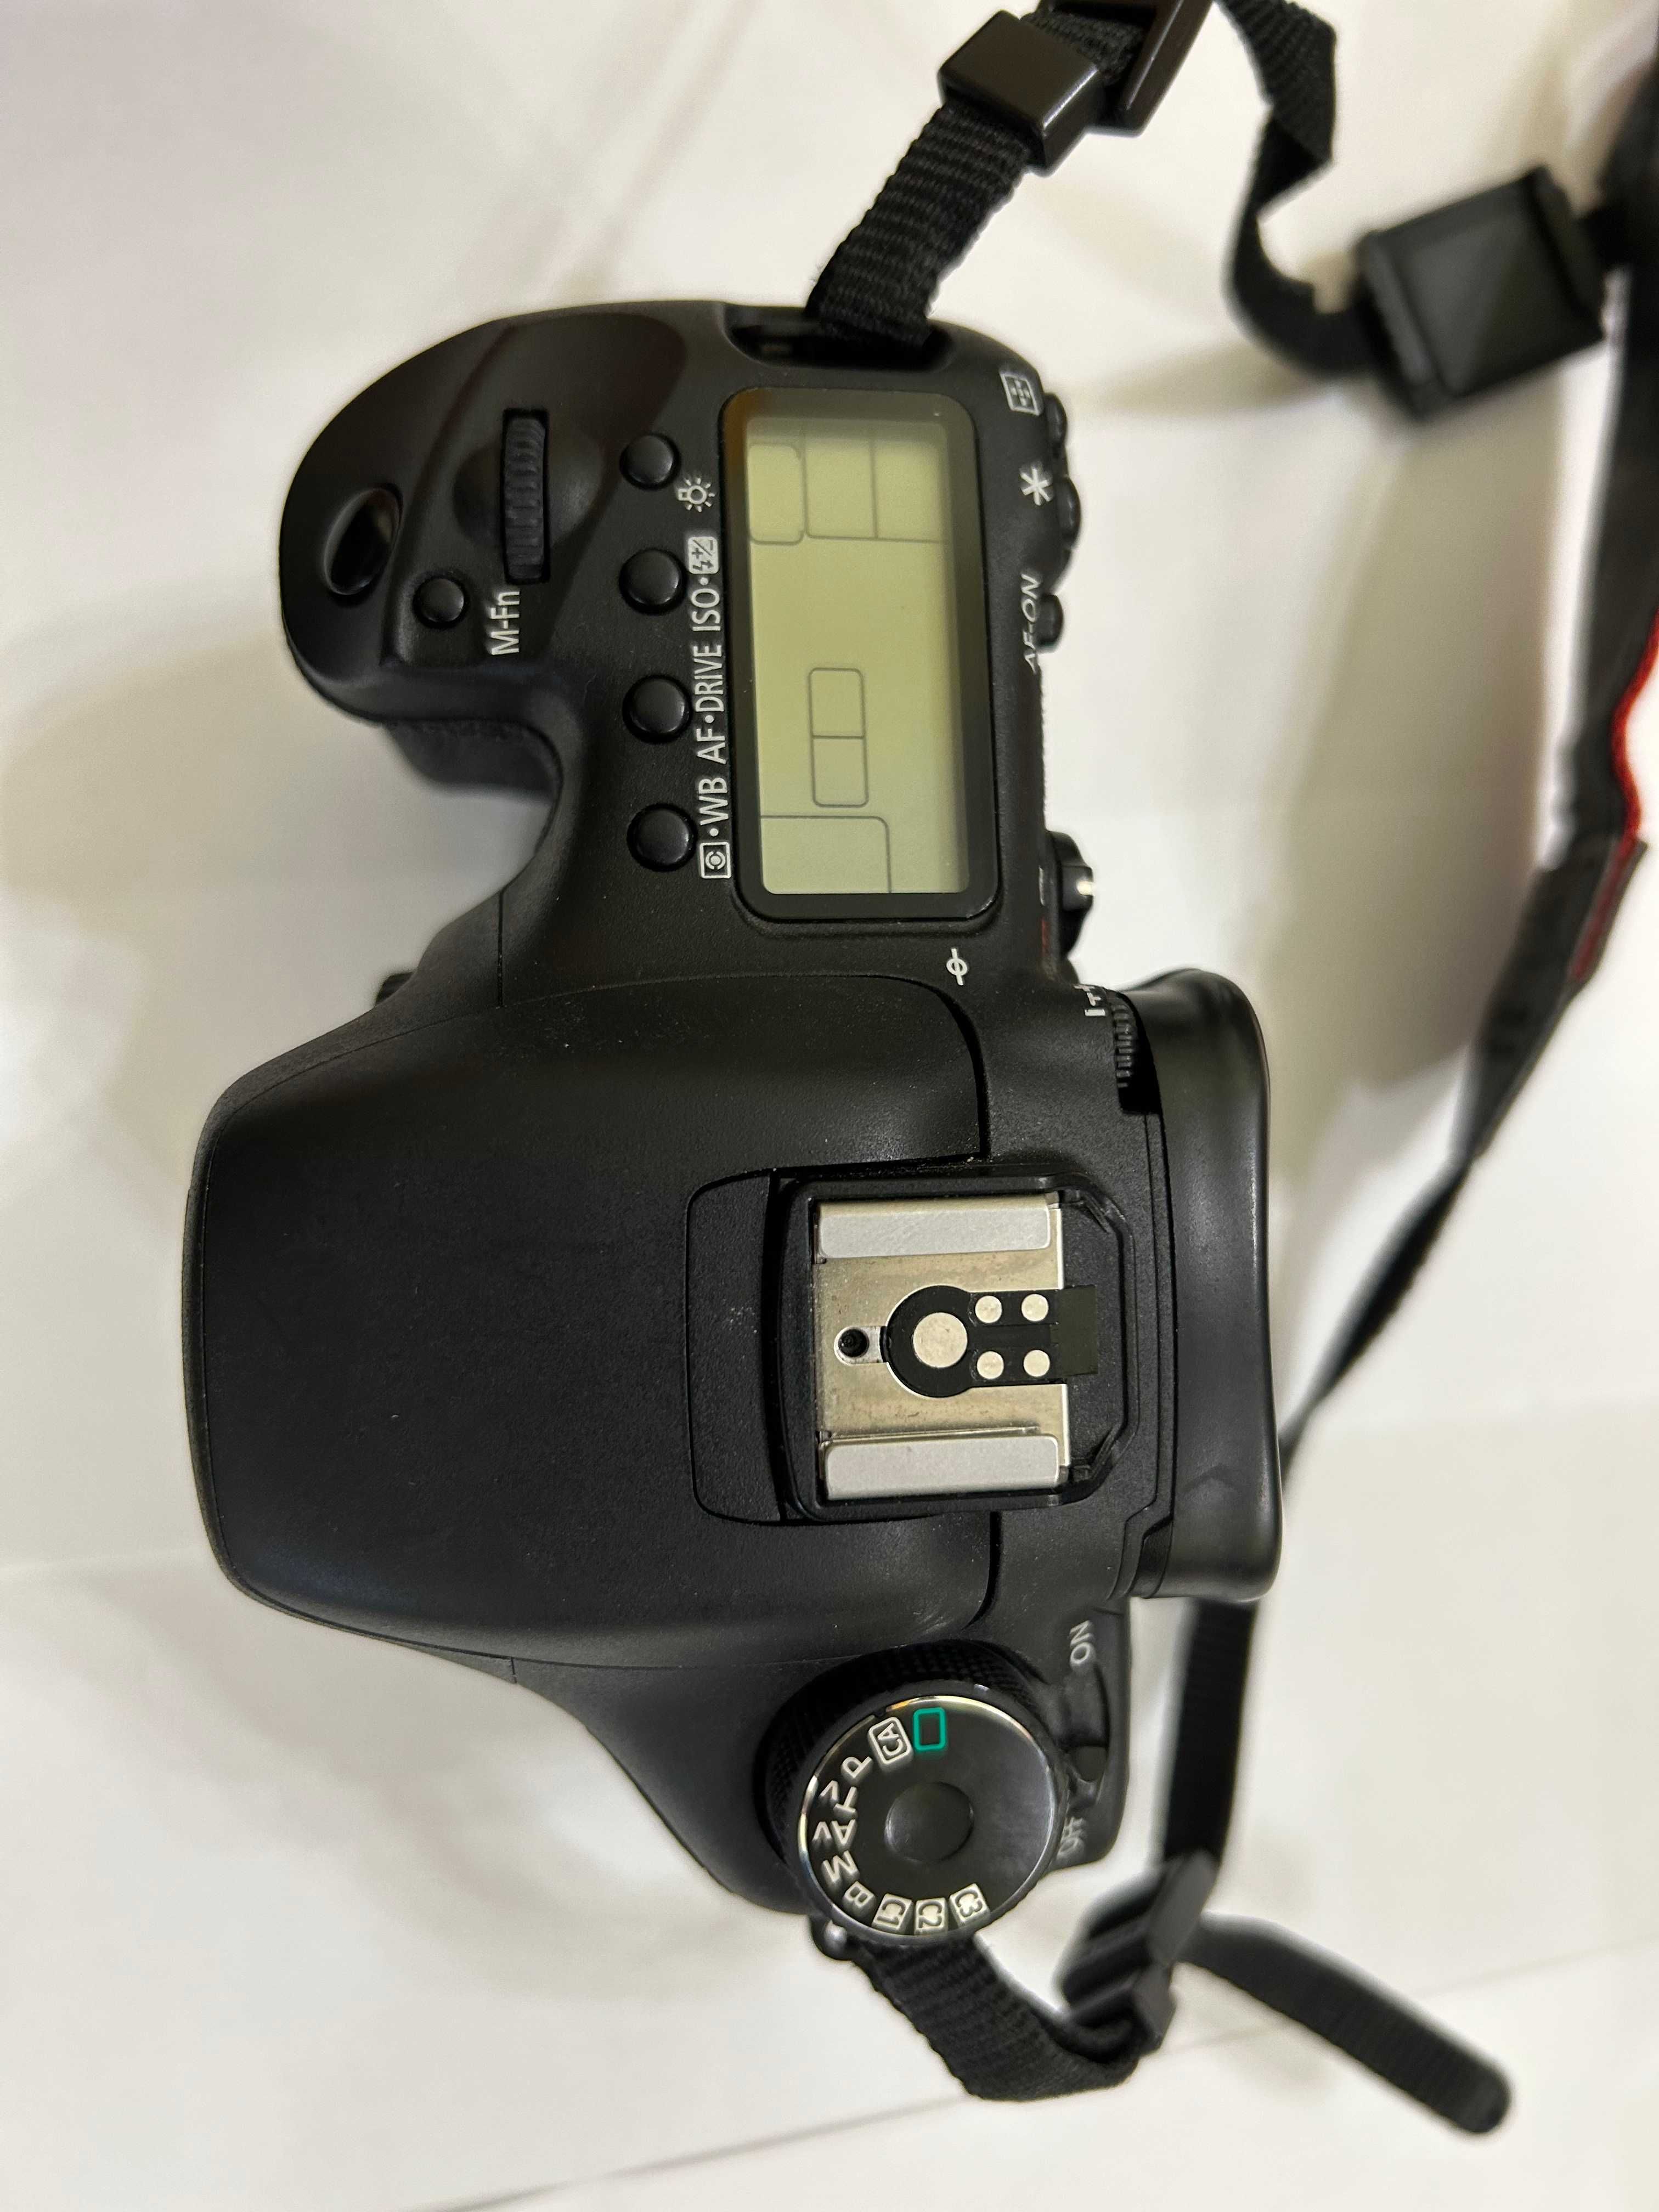 EOS 7D kit with EF 28-135 IS USM